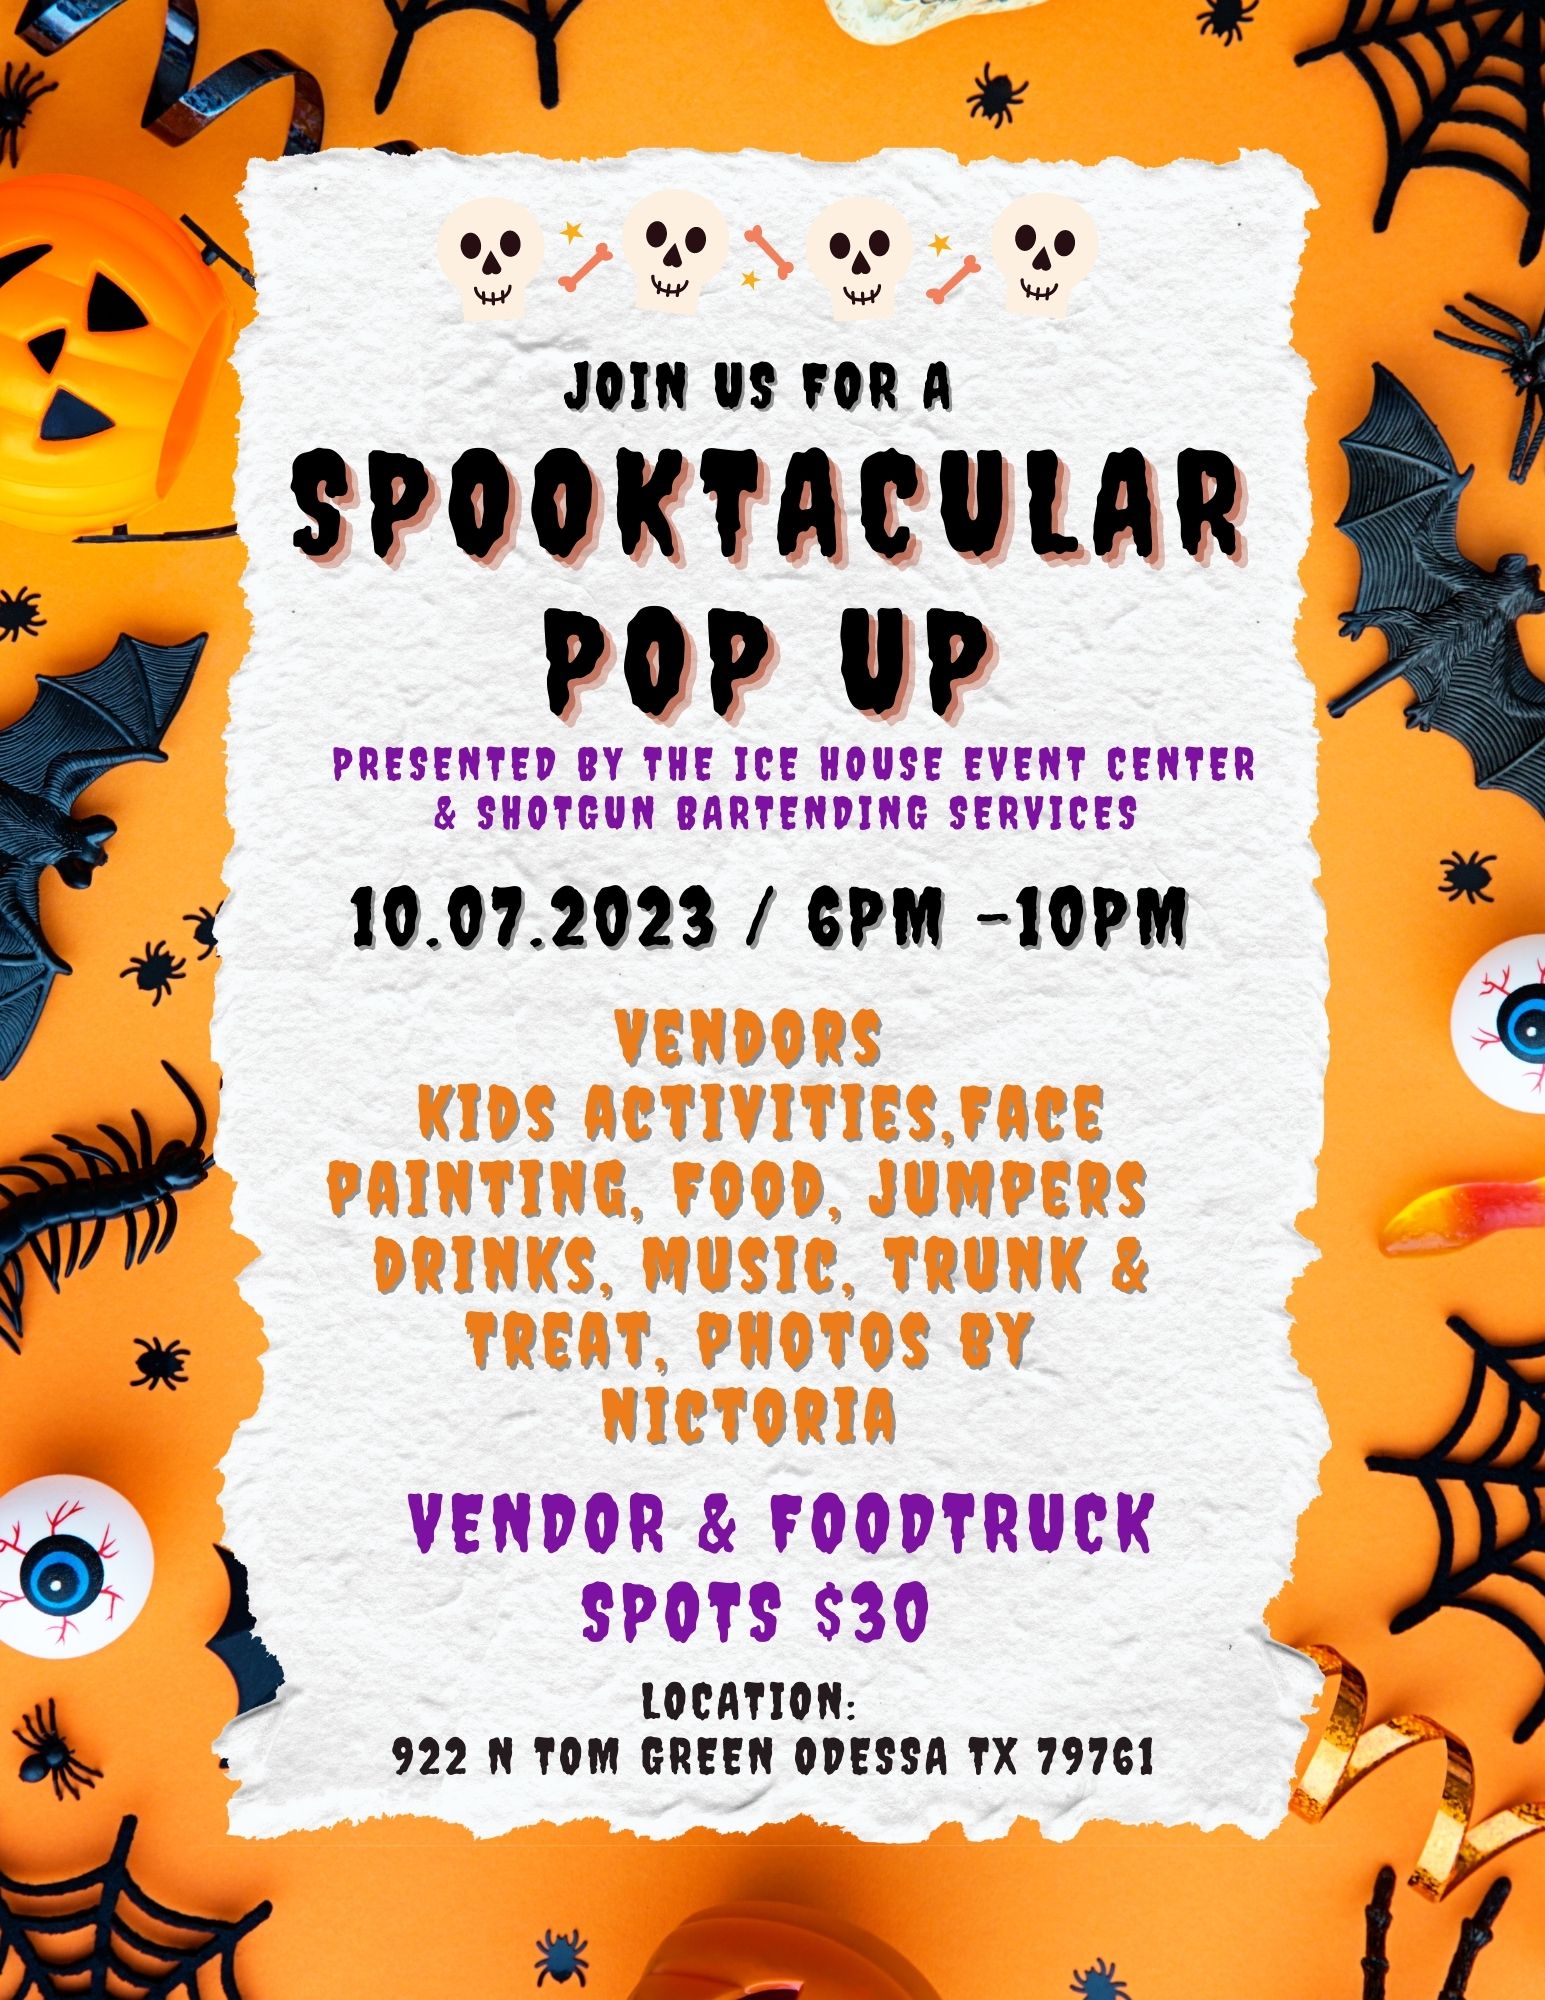 Spooktacular Pop at Ice House Event Center on October 7, 2023 in Odessa, Texas